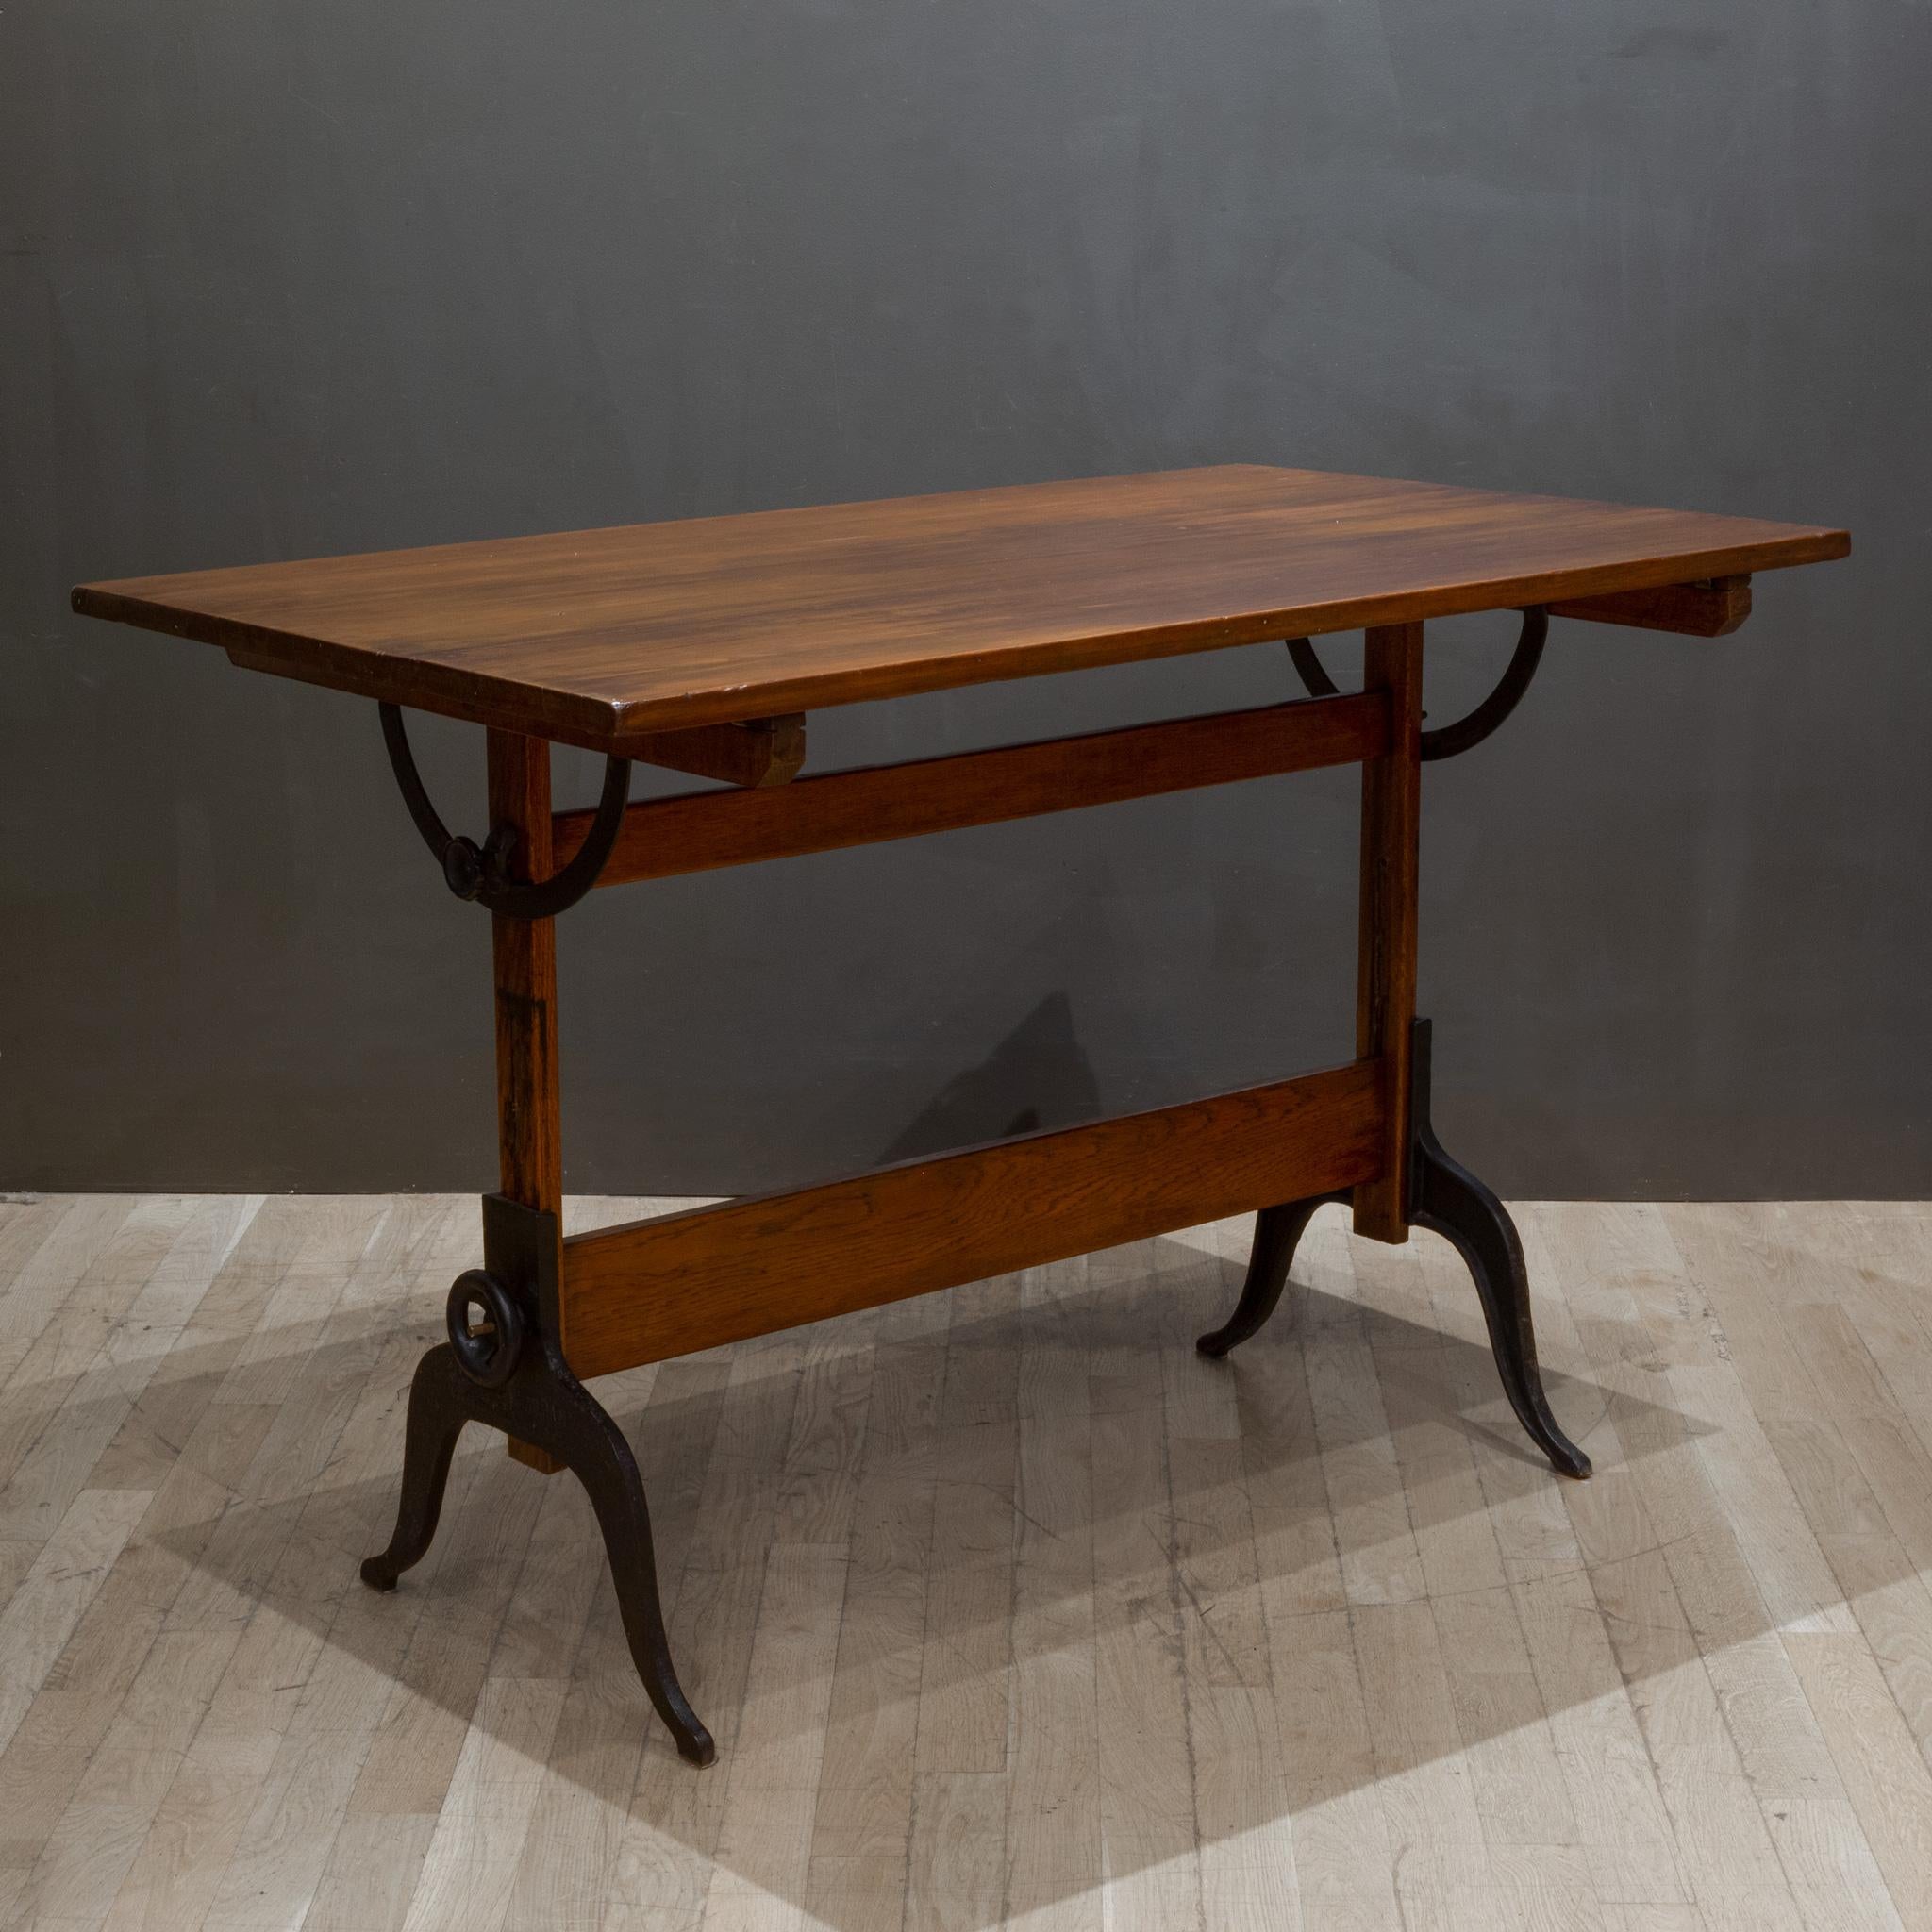 Steel Antique Refinished A. Lietz Co. Wood and Cast Iron Drafting Table, circa 1930